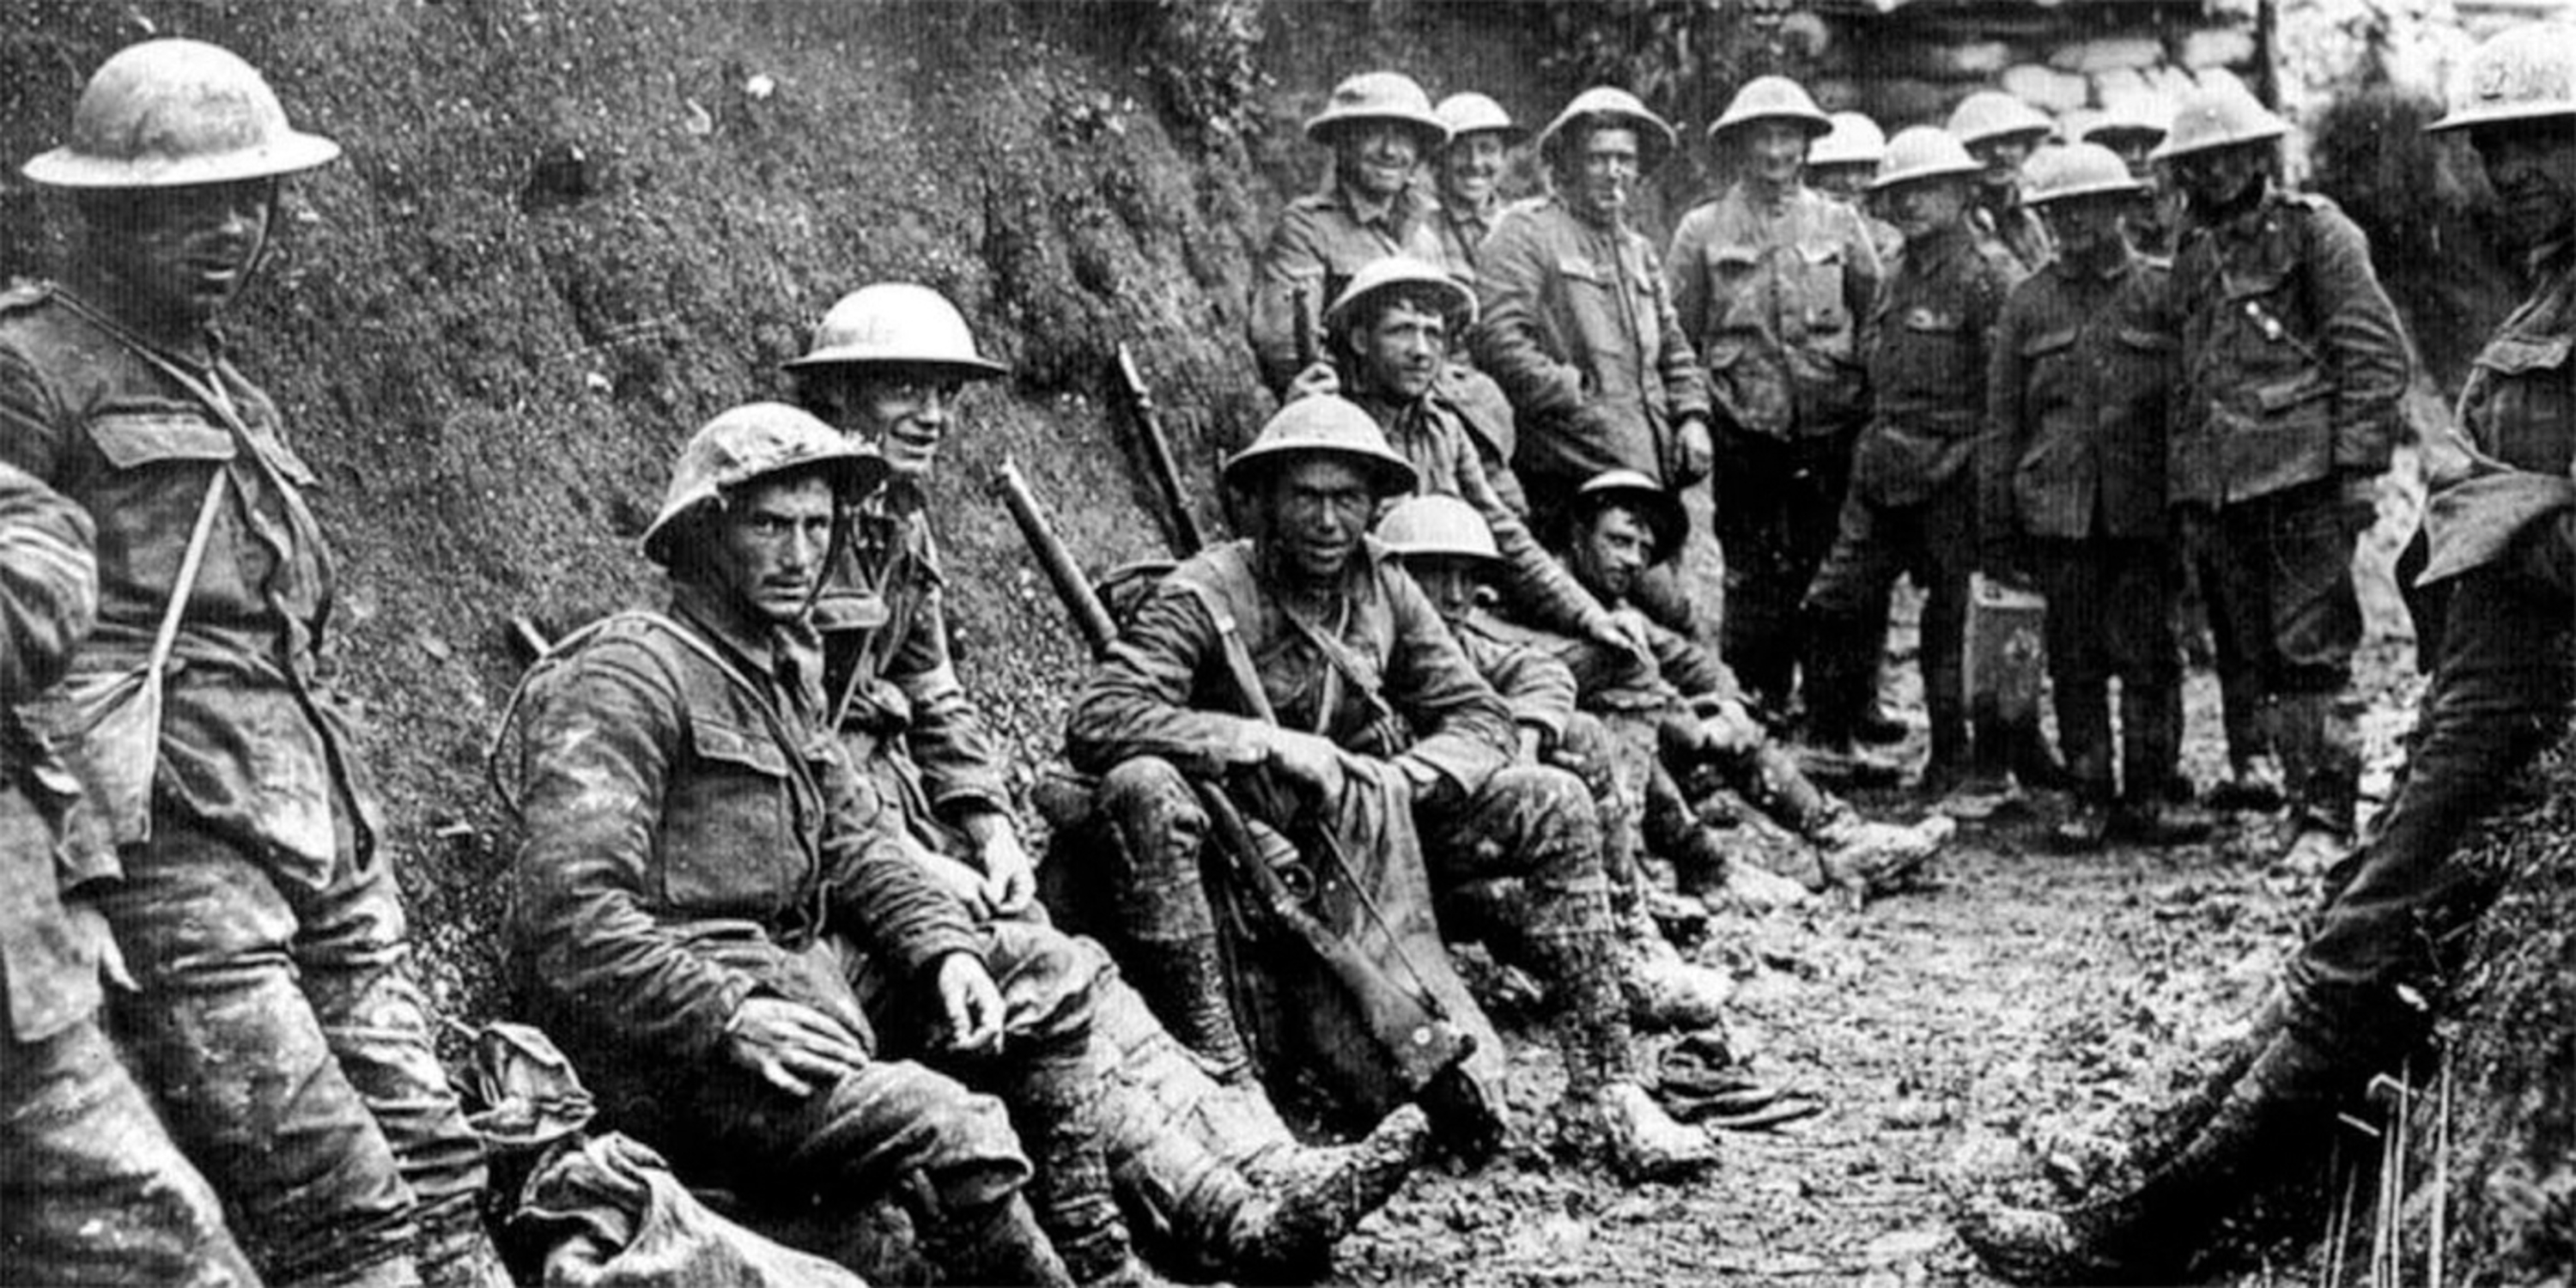 Royal Irish Rifles in foxhole at Battle of the Somme, 1916